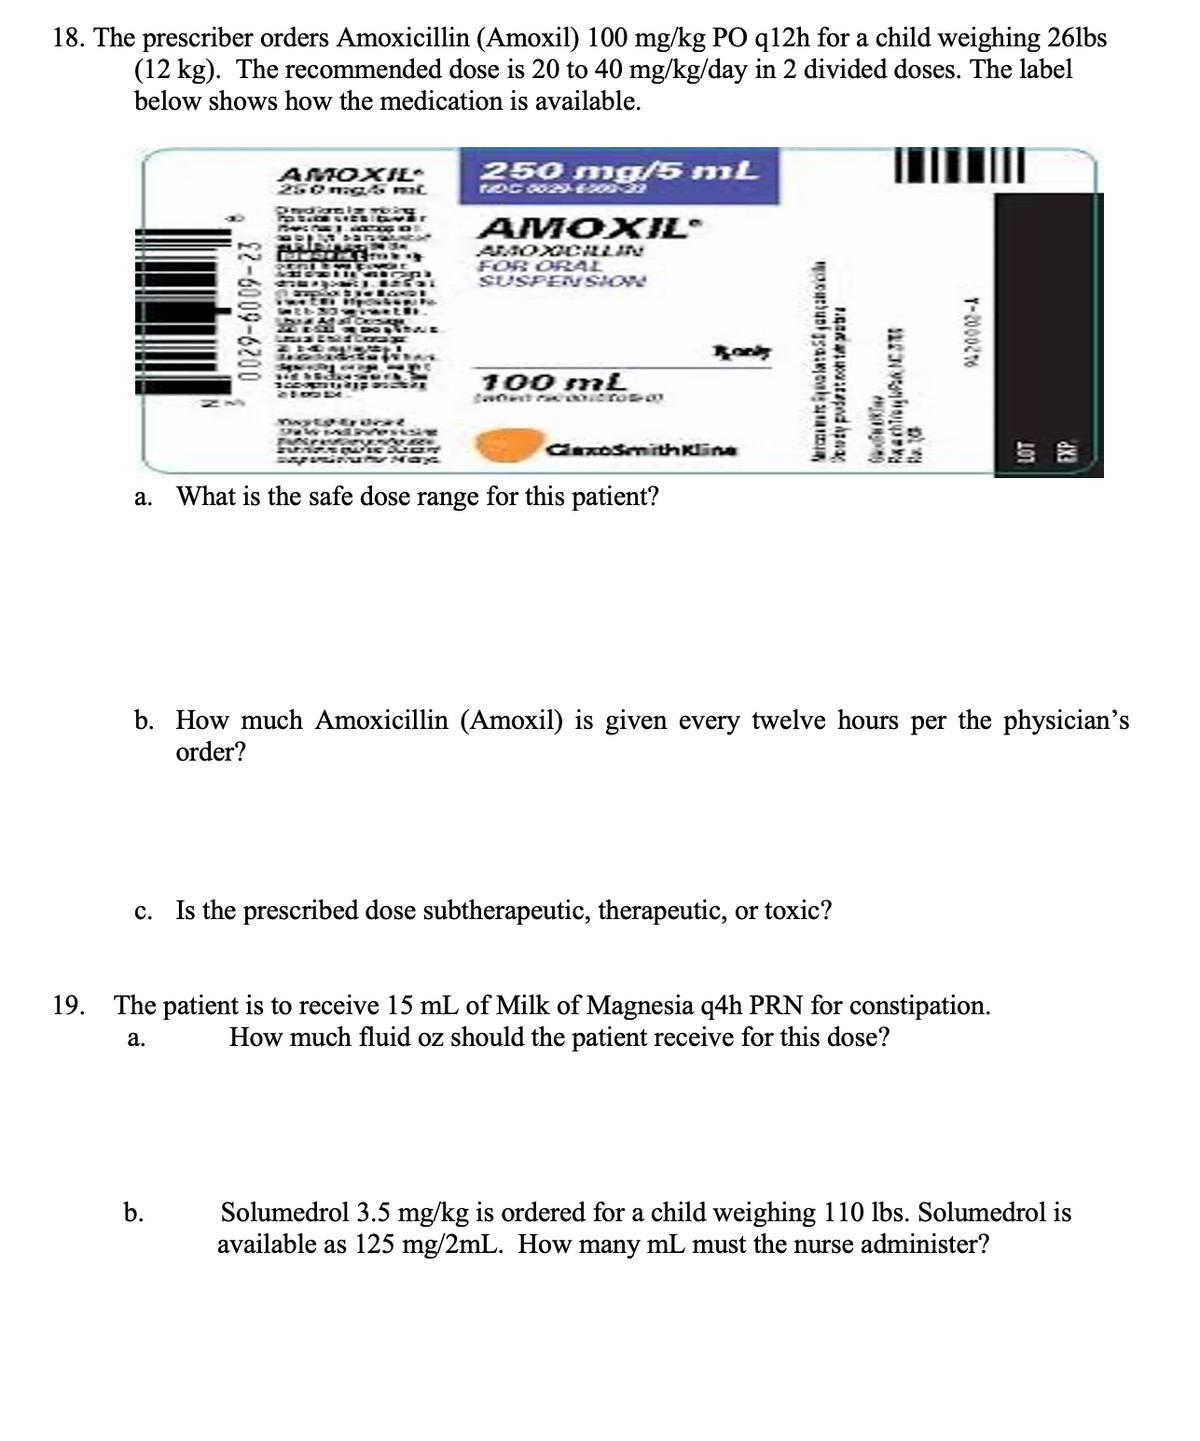 18. The prescriber orders Amoxicillin (Amoxil) 100 mg/kg PO q12h for a child weighing 26lbs
(12 kg). The recommended dose is 20 to 40 mg/kg/day in 2 divided doses. The label
below shows how the medication is available.
0029-6009-23
AMOXIJE
250 mg/5 ml
Indianlar moing
POSAOR LIES Ver
Sect AZZO DE
SPAUNDAY
-3-
spent f
THE
b.
PR
ZEI H
417
Ada C STUE
ENEC
250 mg/5 mL
TDC 0029-6-209-23
AMOXIL
AMOXICILLIN
FOR ORAL
SUSPENSION
100 mL
wted raconic rose 00
Epero
WEKEN N
MONDWIE DURE
exposition Max
a. What is the safe dose range for this patient?
Rook
ClaxoSmithKline
Magança
ty pudratnonte p
c. Is the prescribed dose subtherapeutic, therapeutic, or toxic?
Rachtig NC3
OAKT
R10
b. How much Amoxicillin (Amoxil) is given every twelve hours per the physician's
order?
T-2000276
19. The patient is to receive 15 mL of Milk of Magnesia q4h PRN for constipation.
How much fluid oz should the patient receive for this dose?
a.
Solumedrol 3.5 mg/kg is ordered for a child weighing 110 lbs. Solumedrol is
available as 125 mg/2mL. How many mL must the nurse administer?